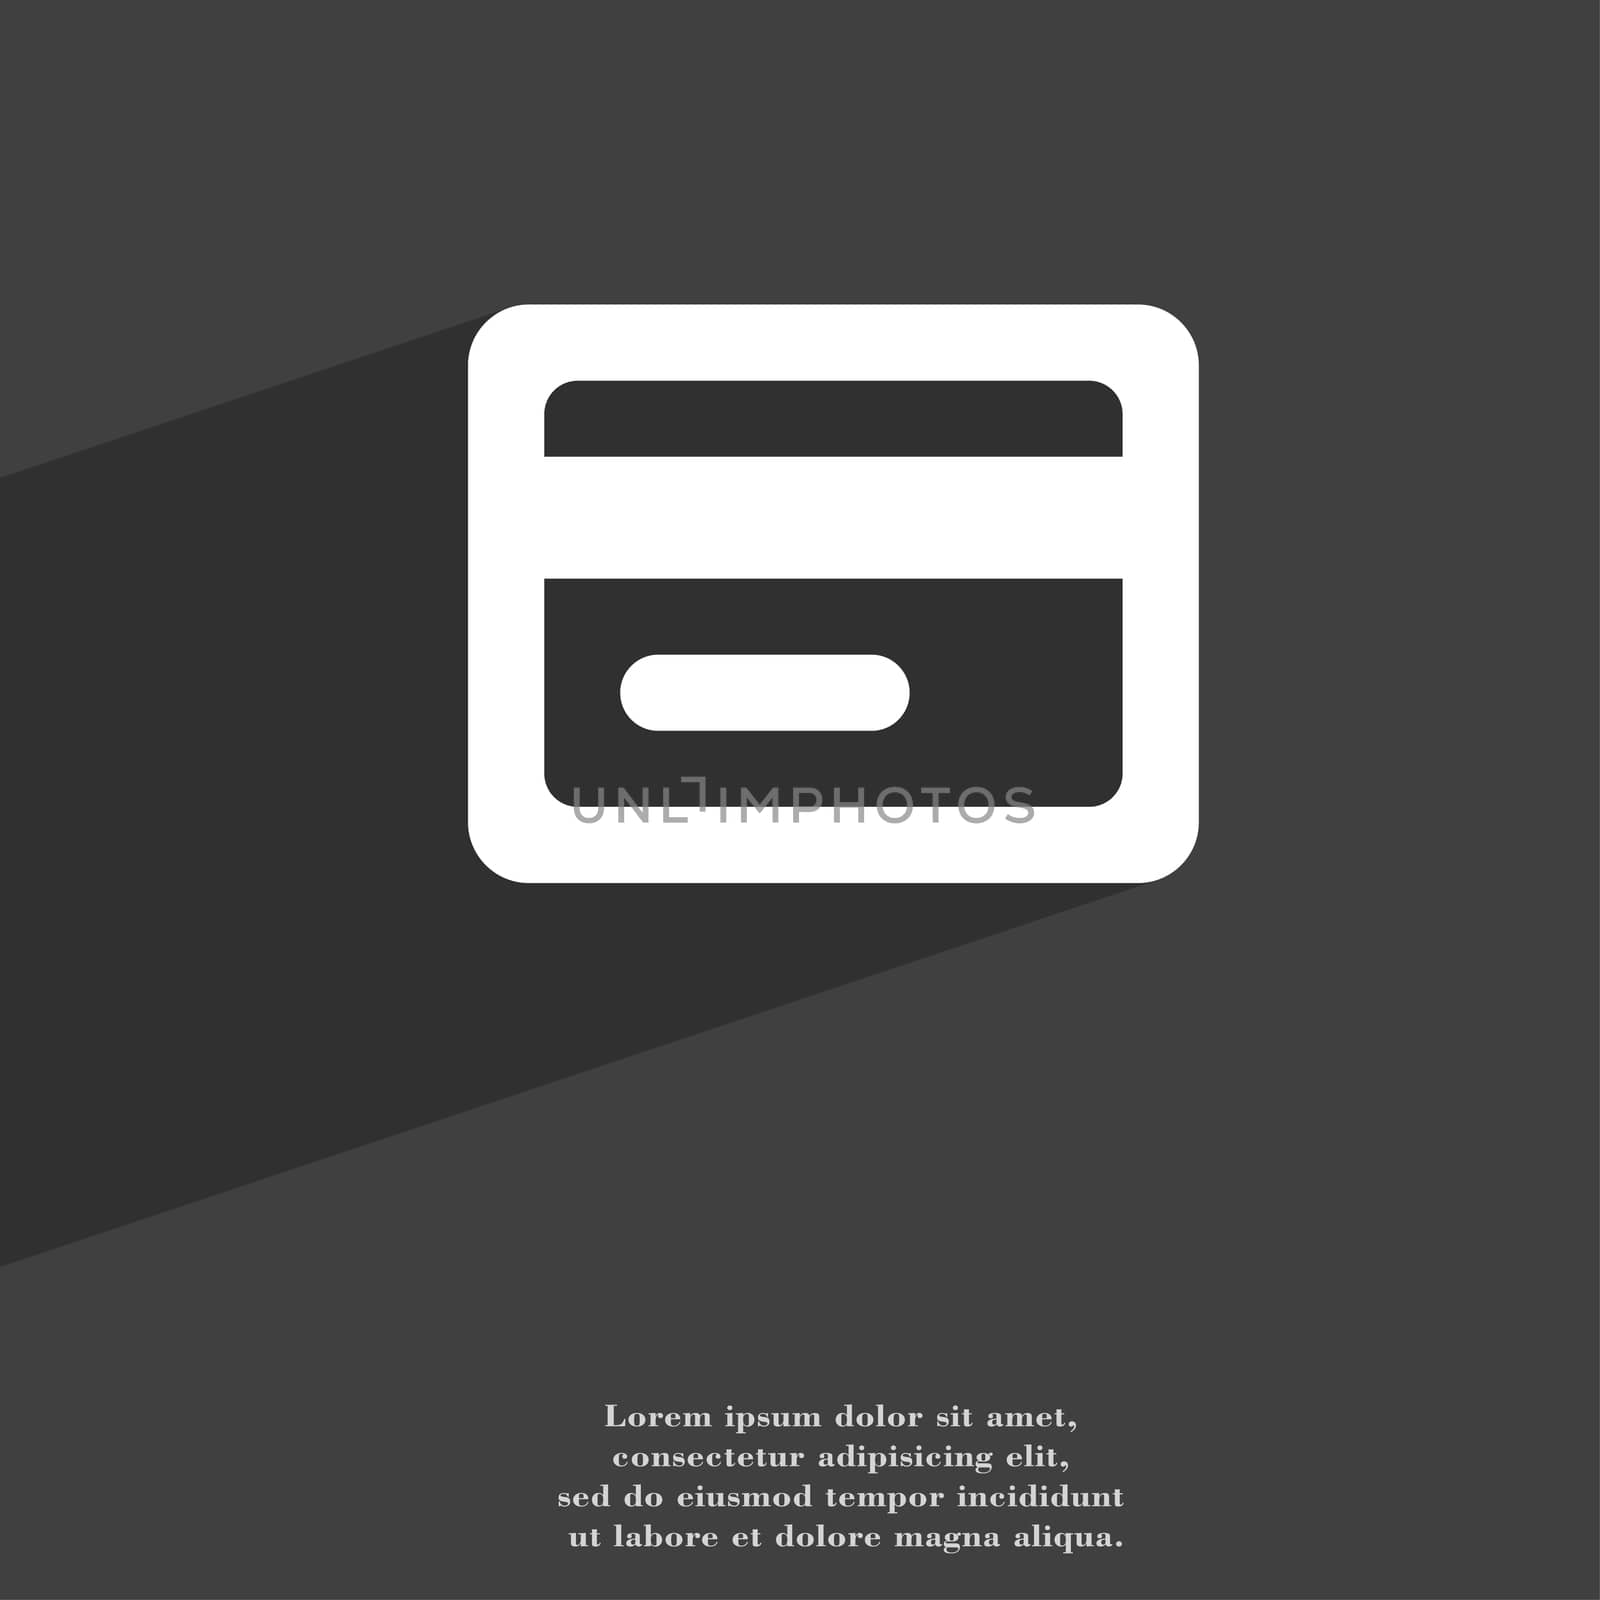 credit card icon symbol Flat modern web design with long shadow and space for your text. illustration